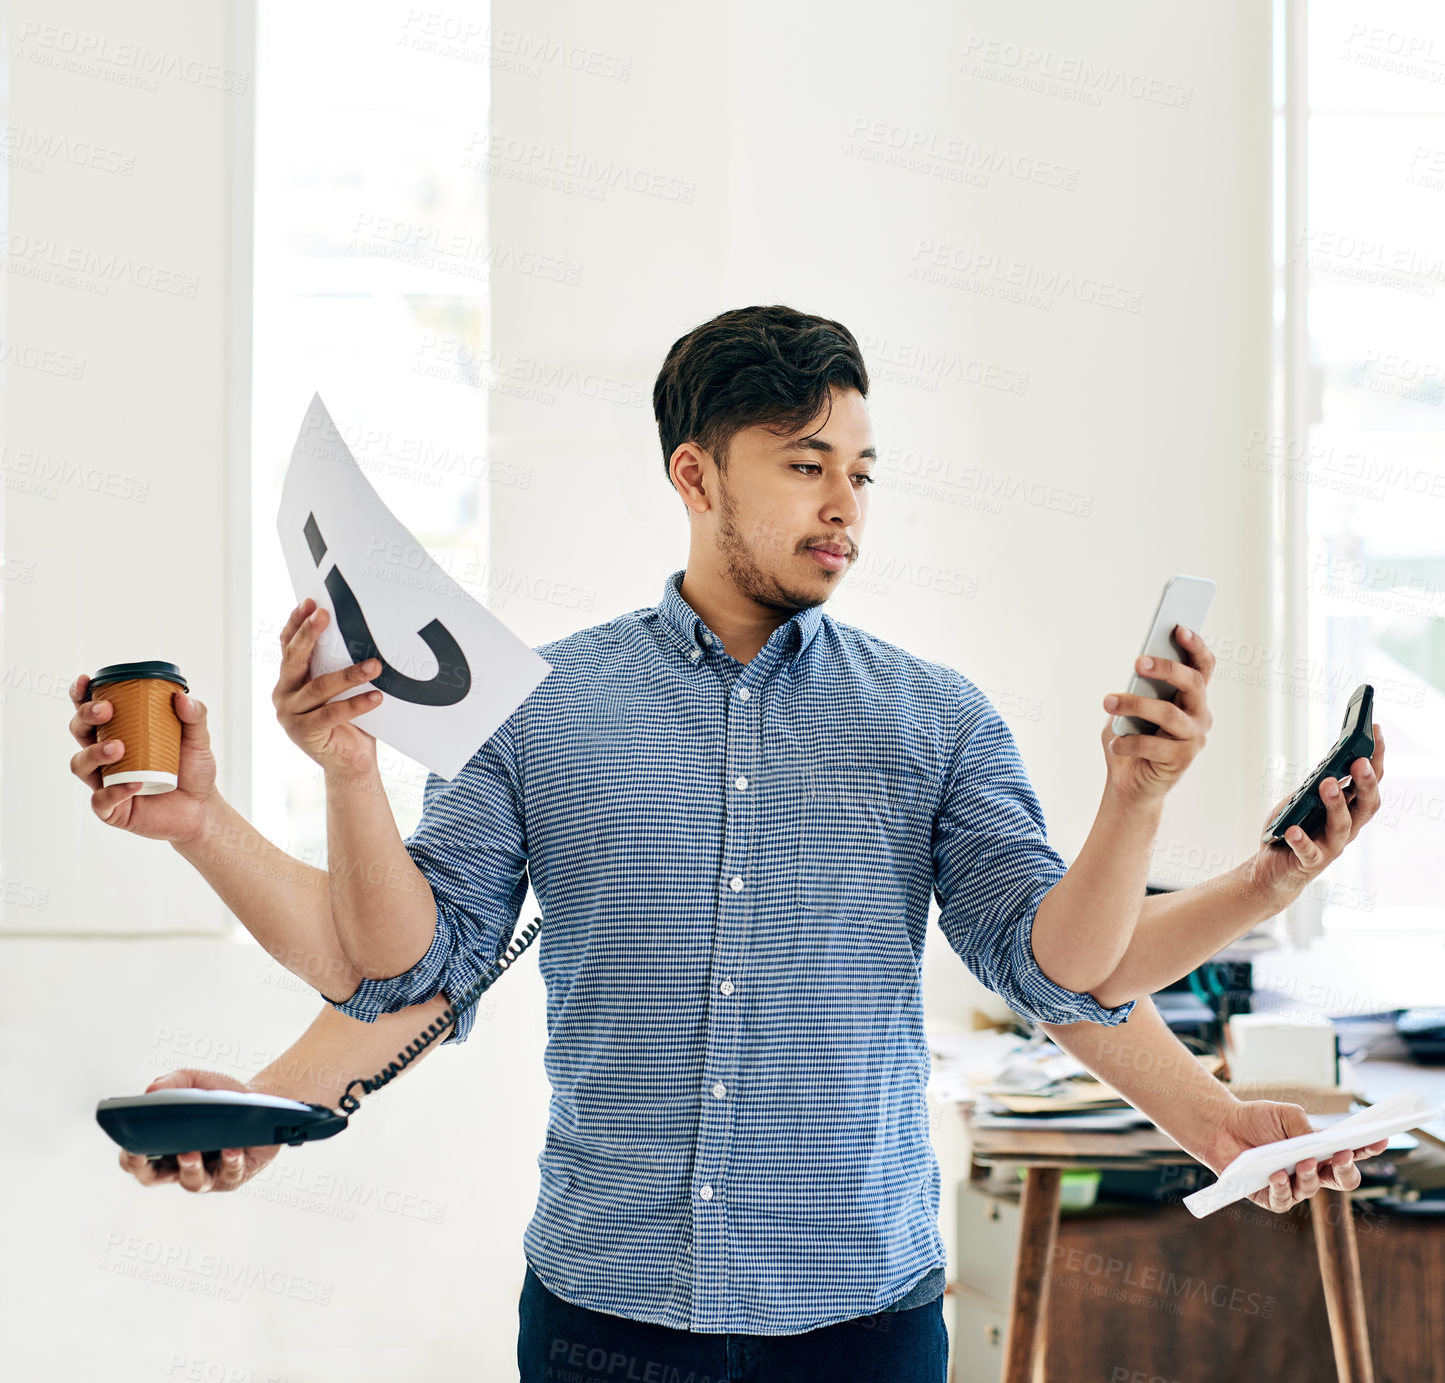 Buy stock photo Shot of a young entrepreneur multitasking at work with multiple arms